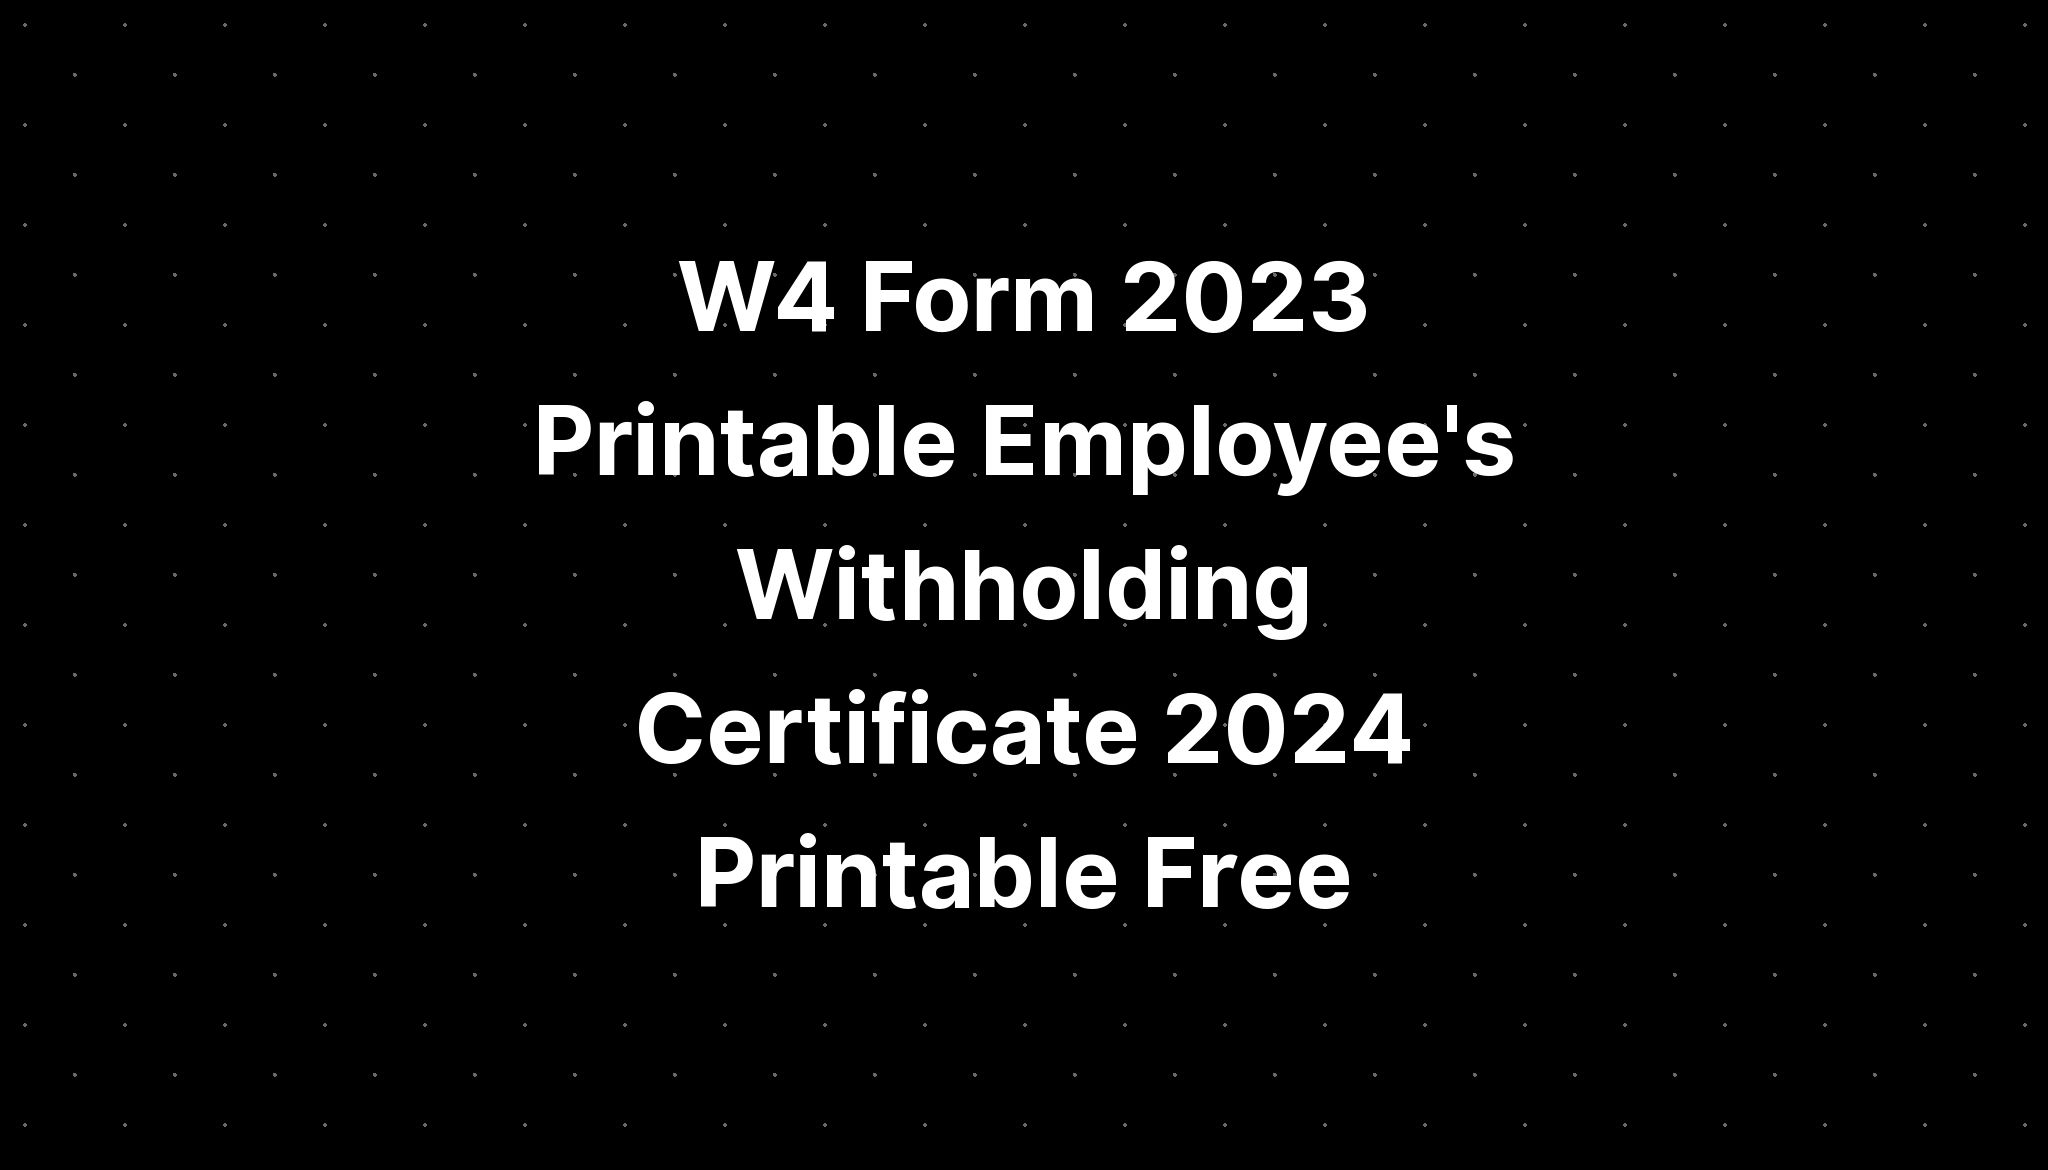 W4 Form 2023 Printable Employee's Withholding Certificate 2024